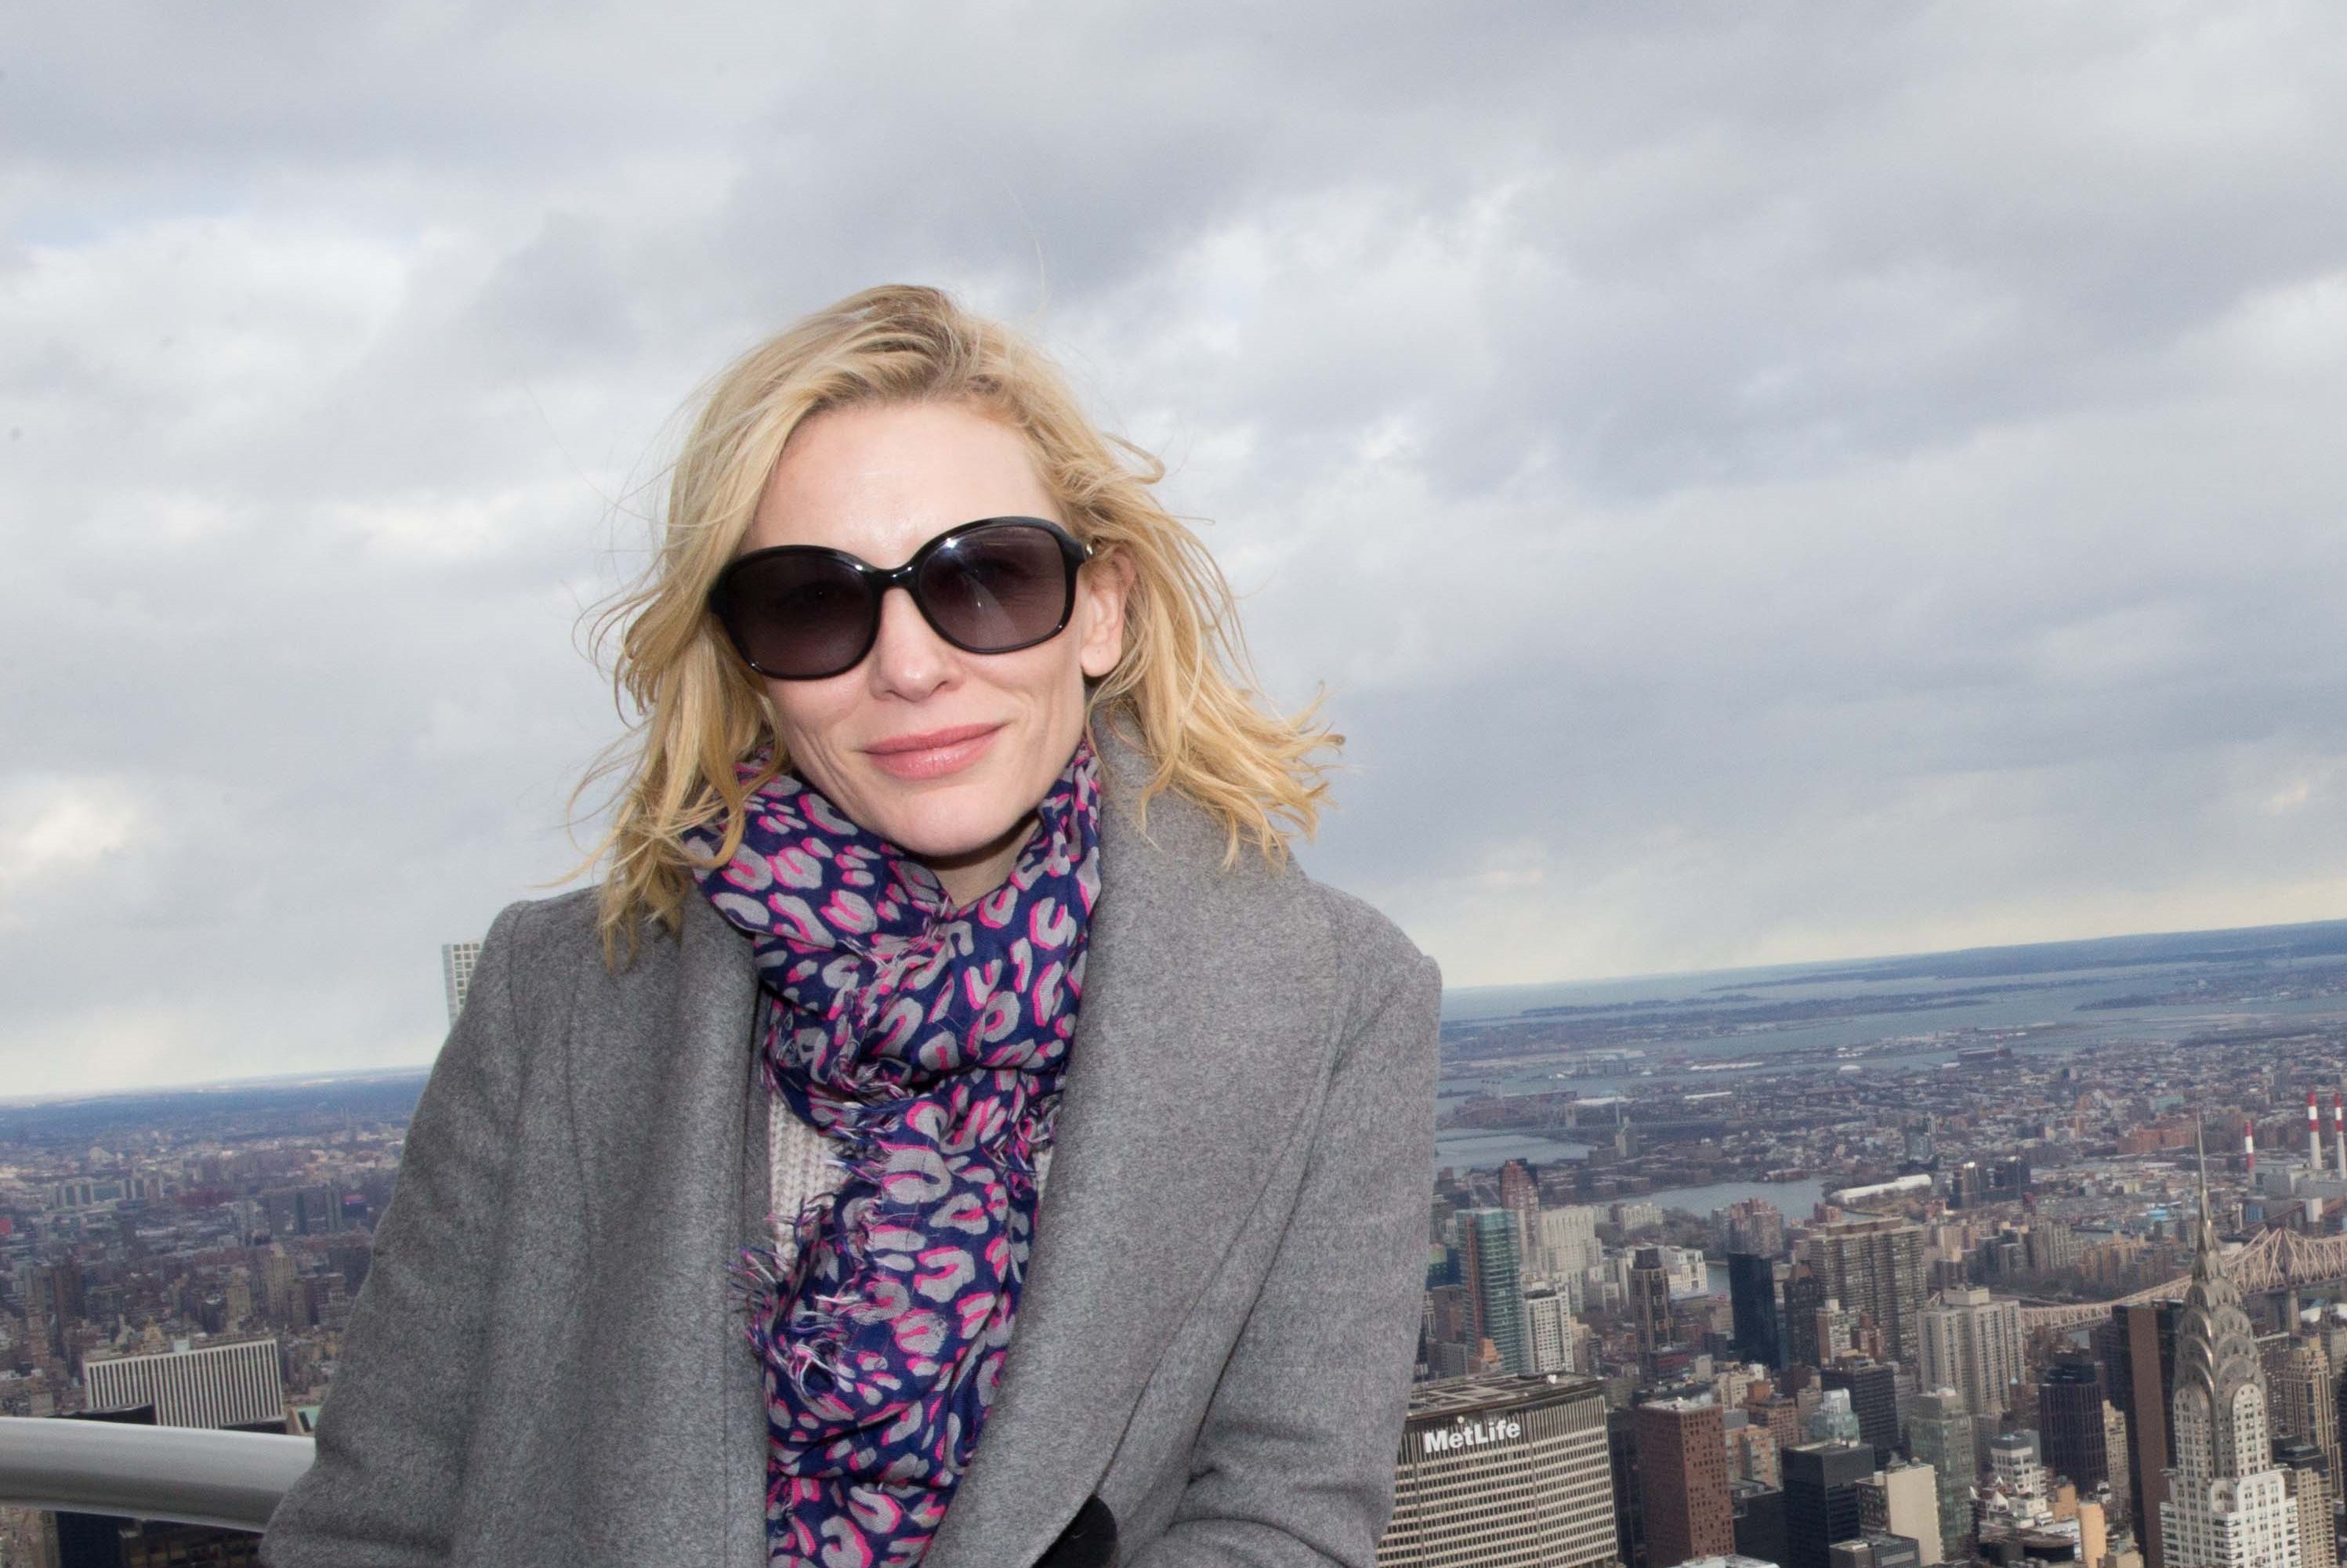 Cate Blanchett visits the Empire State Building